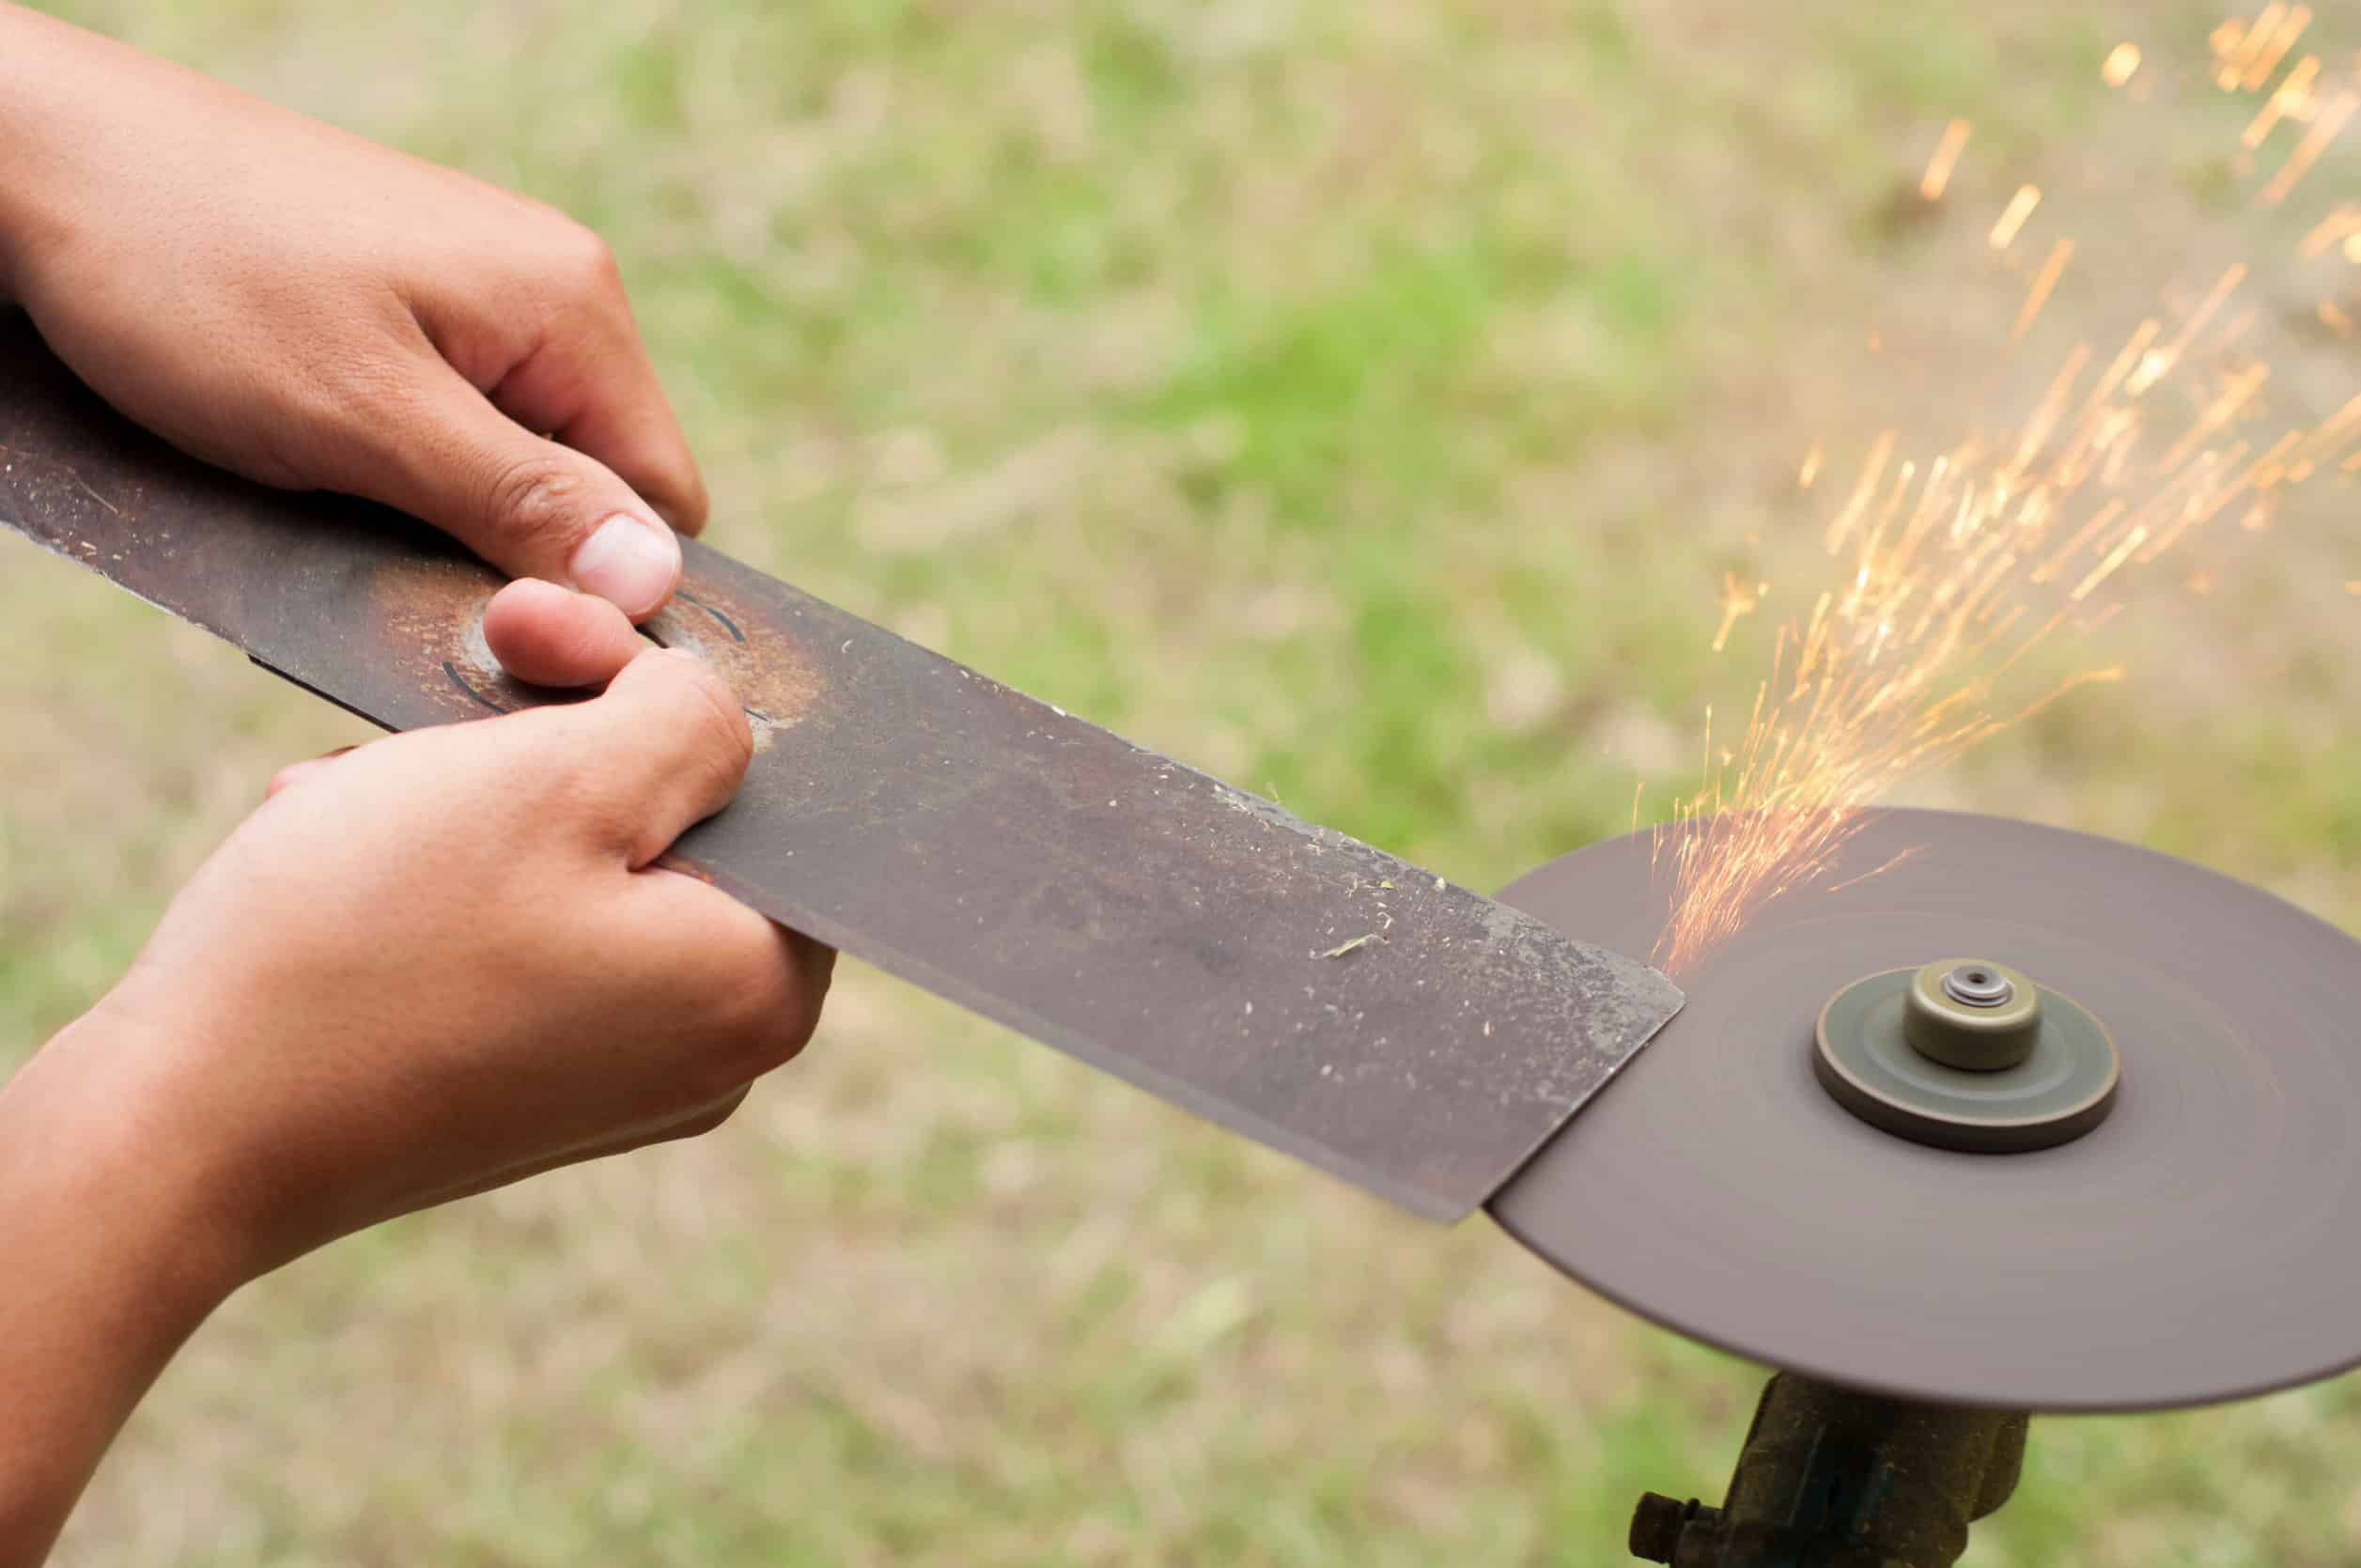 How to sharpen lawnmower blades with a bench grinder